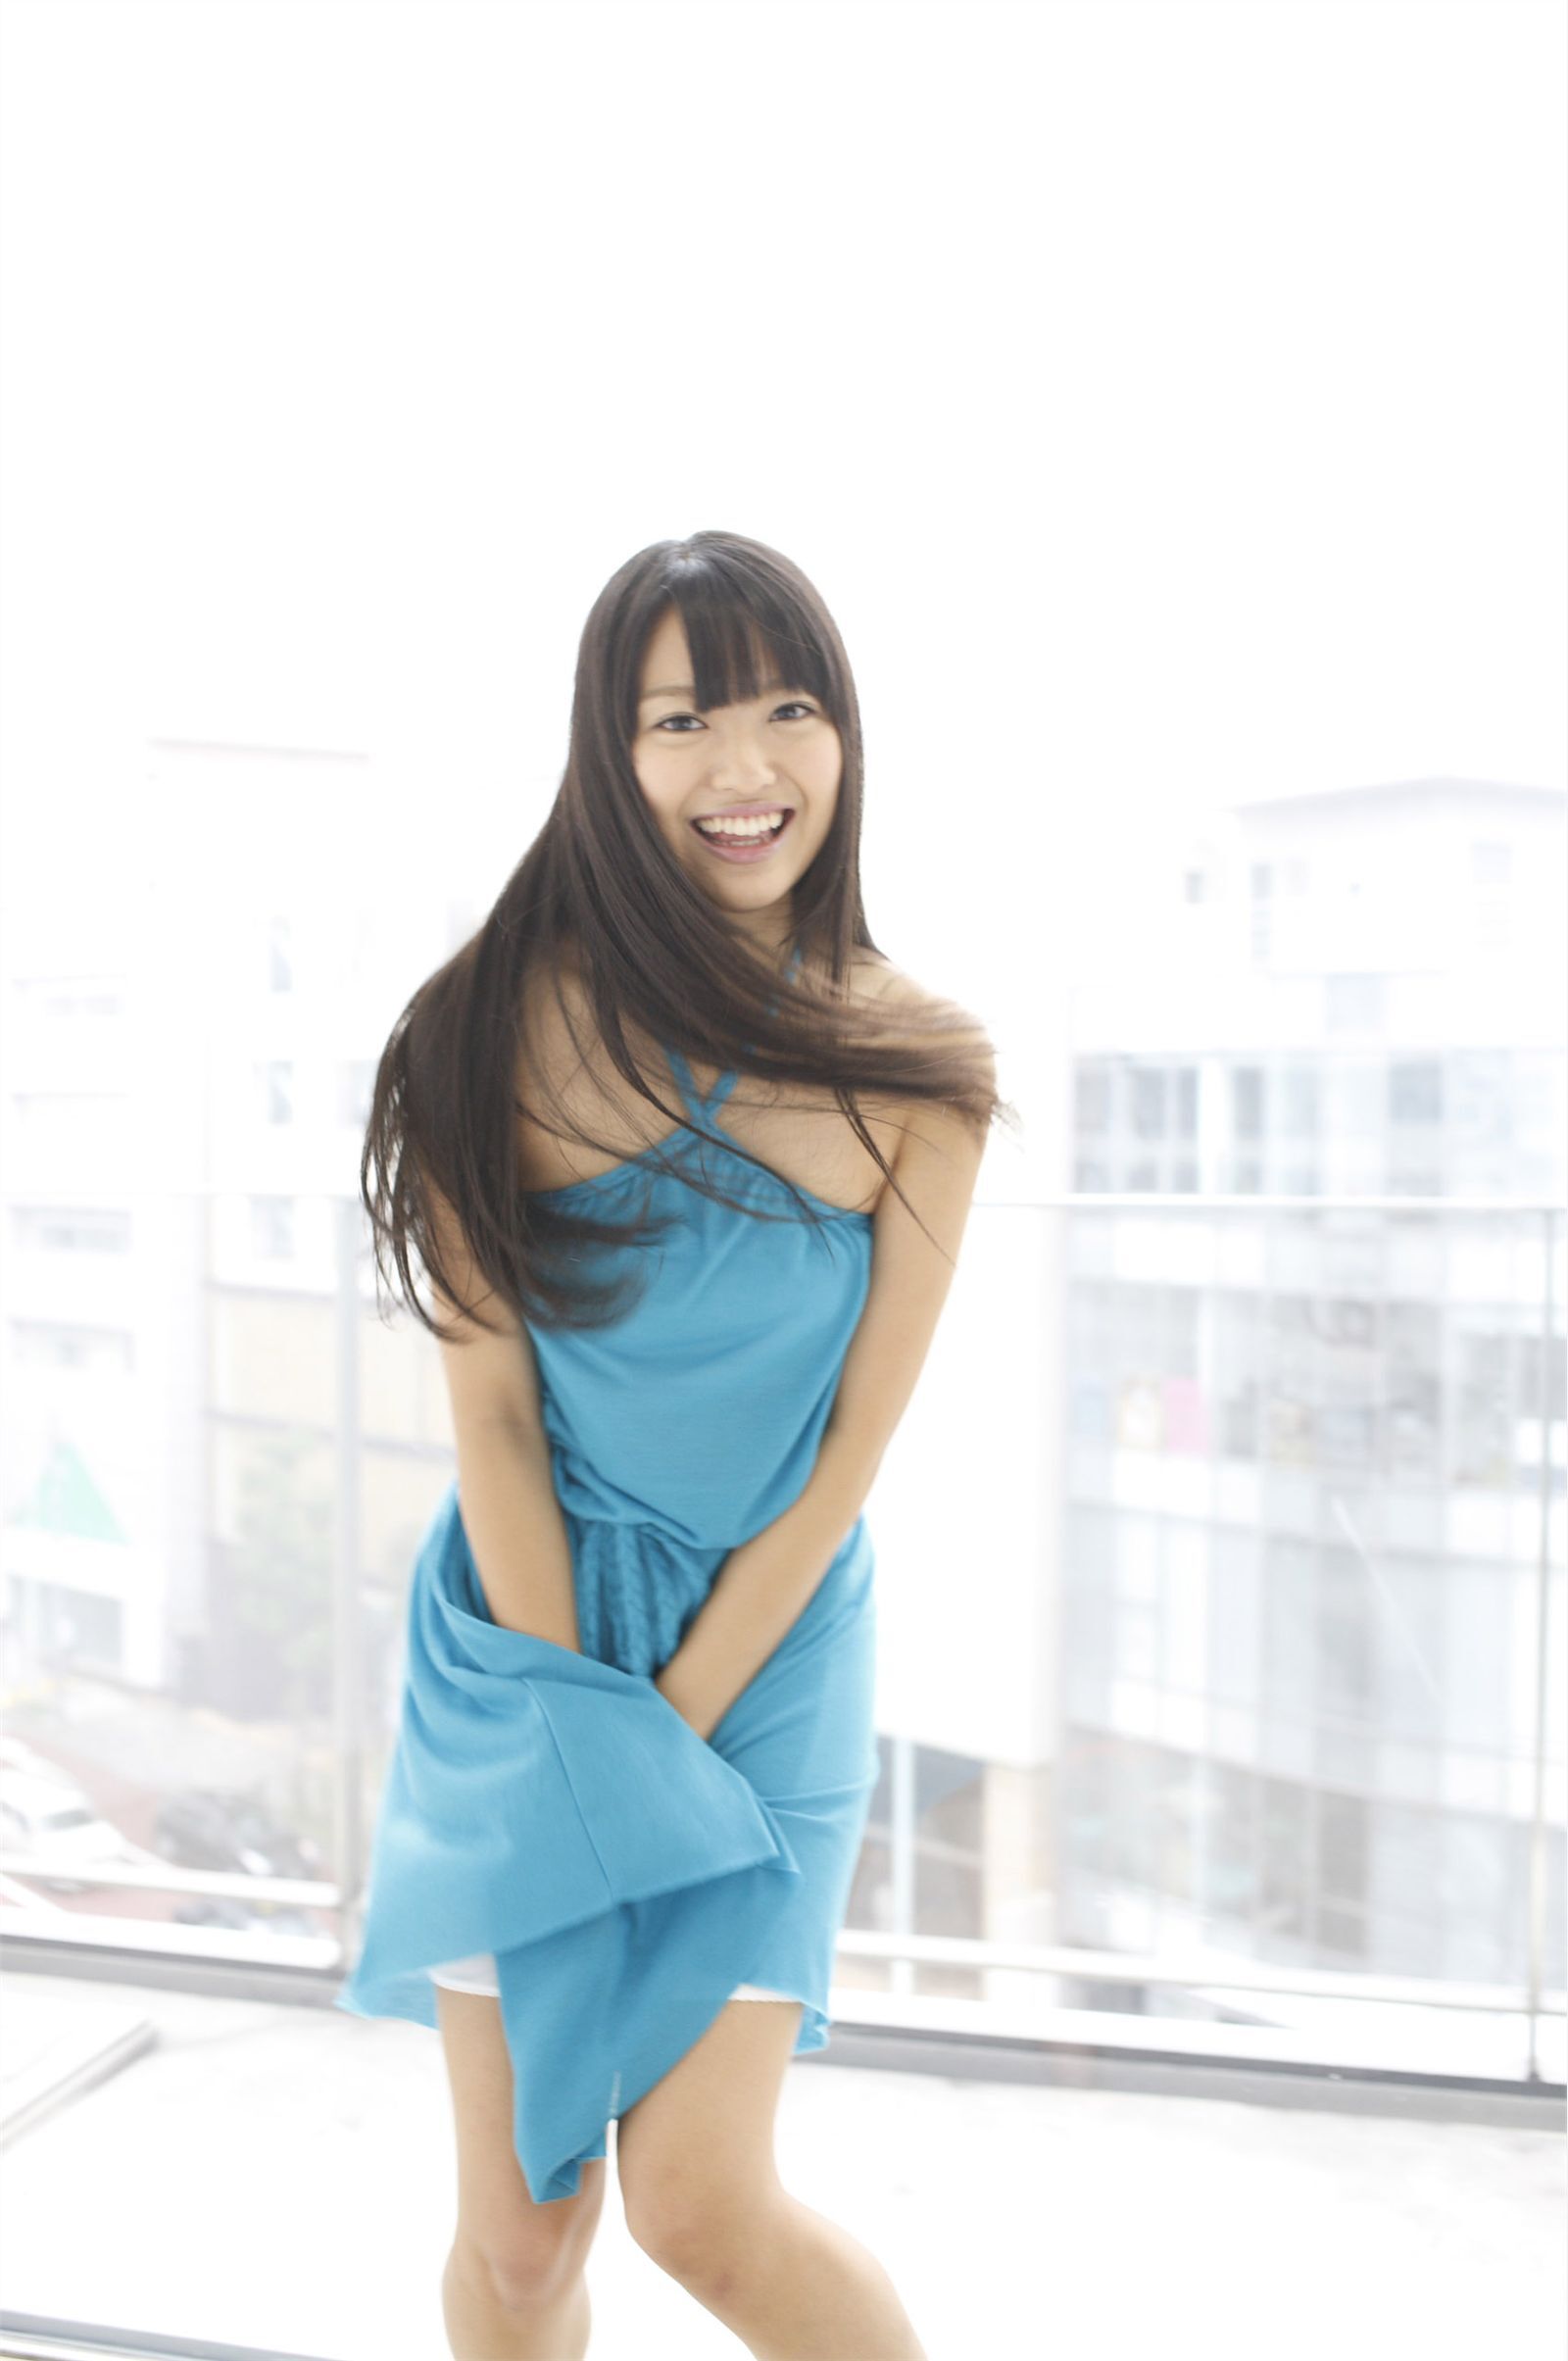 [WPB net] 2013.01.30 No.135 Japanese beauty picture 2